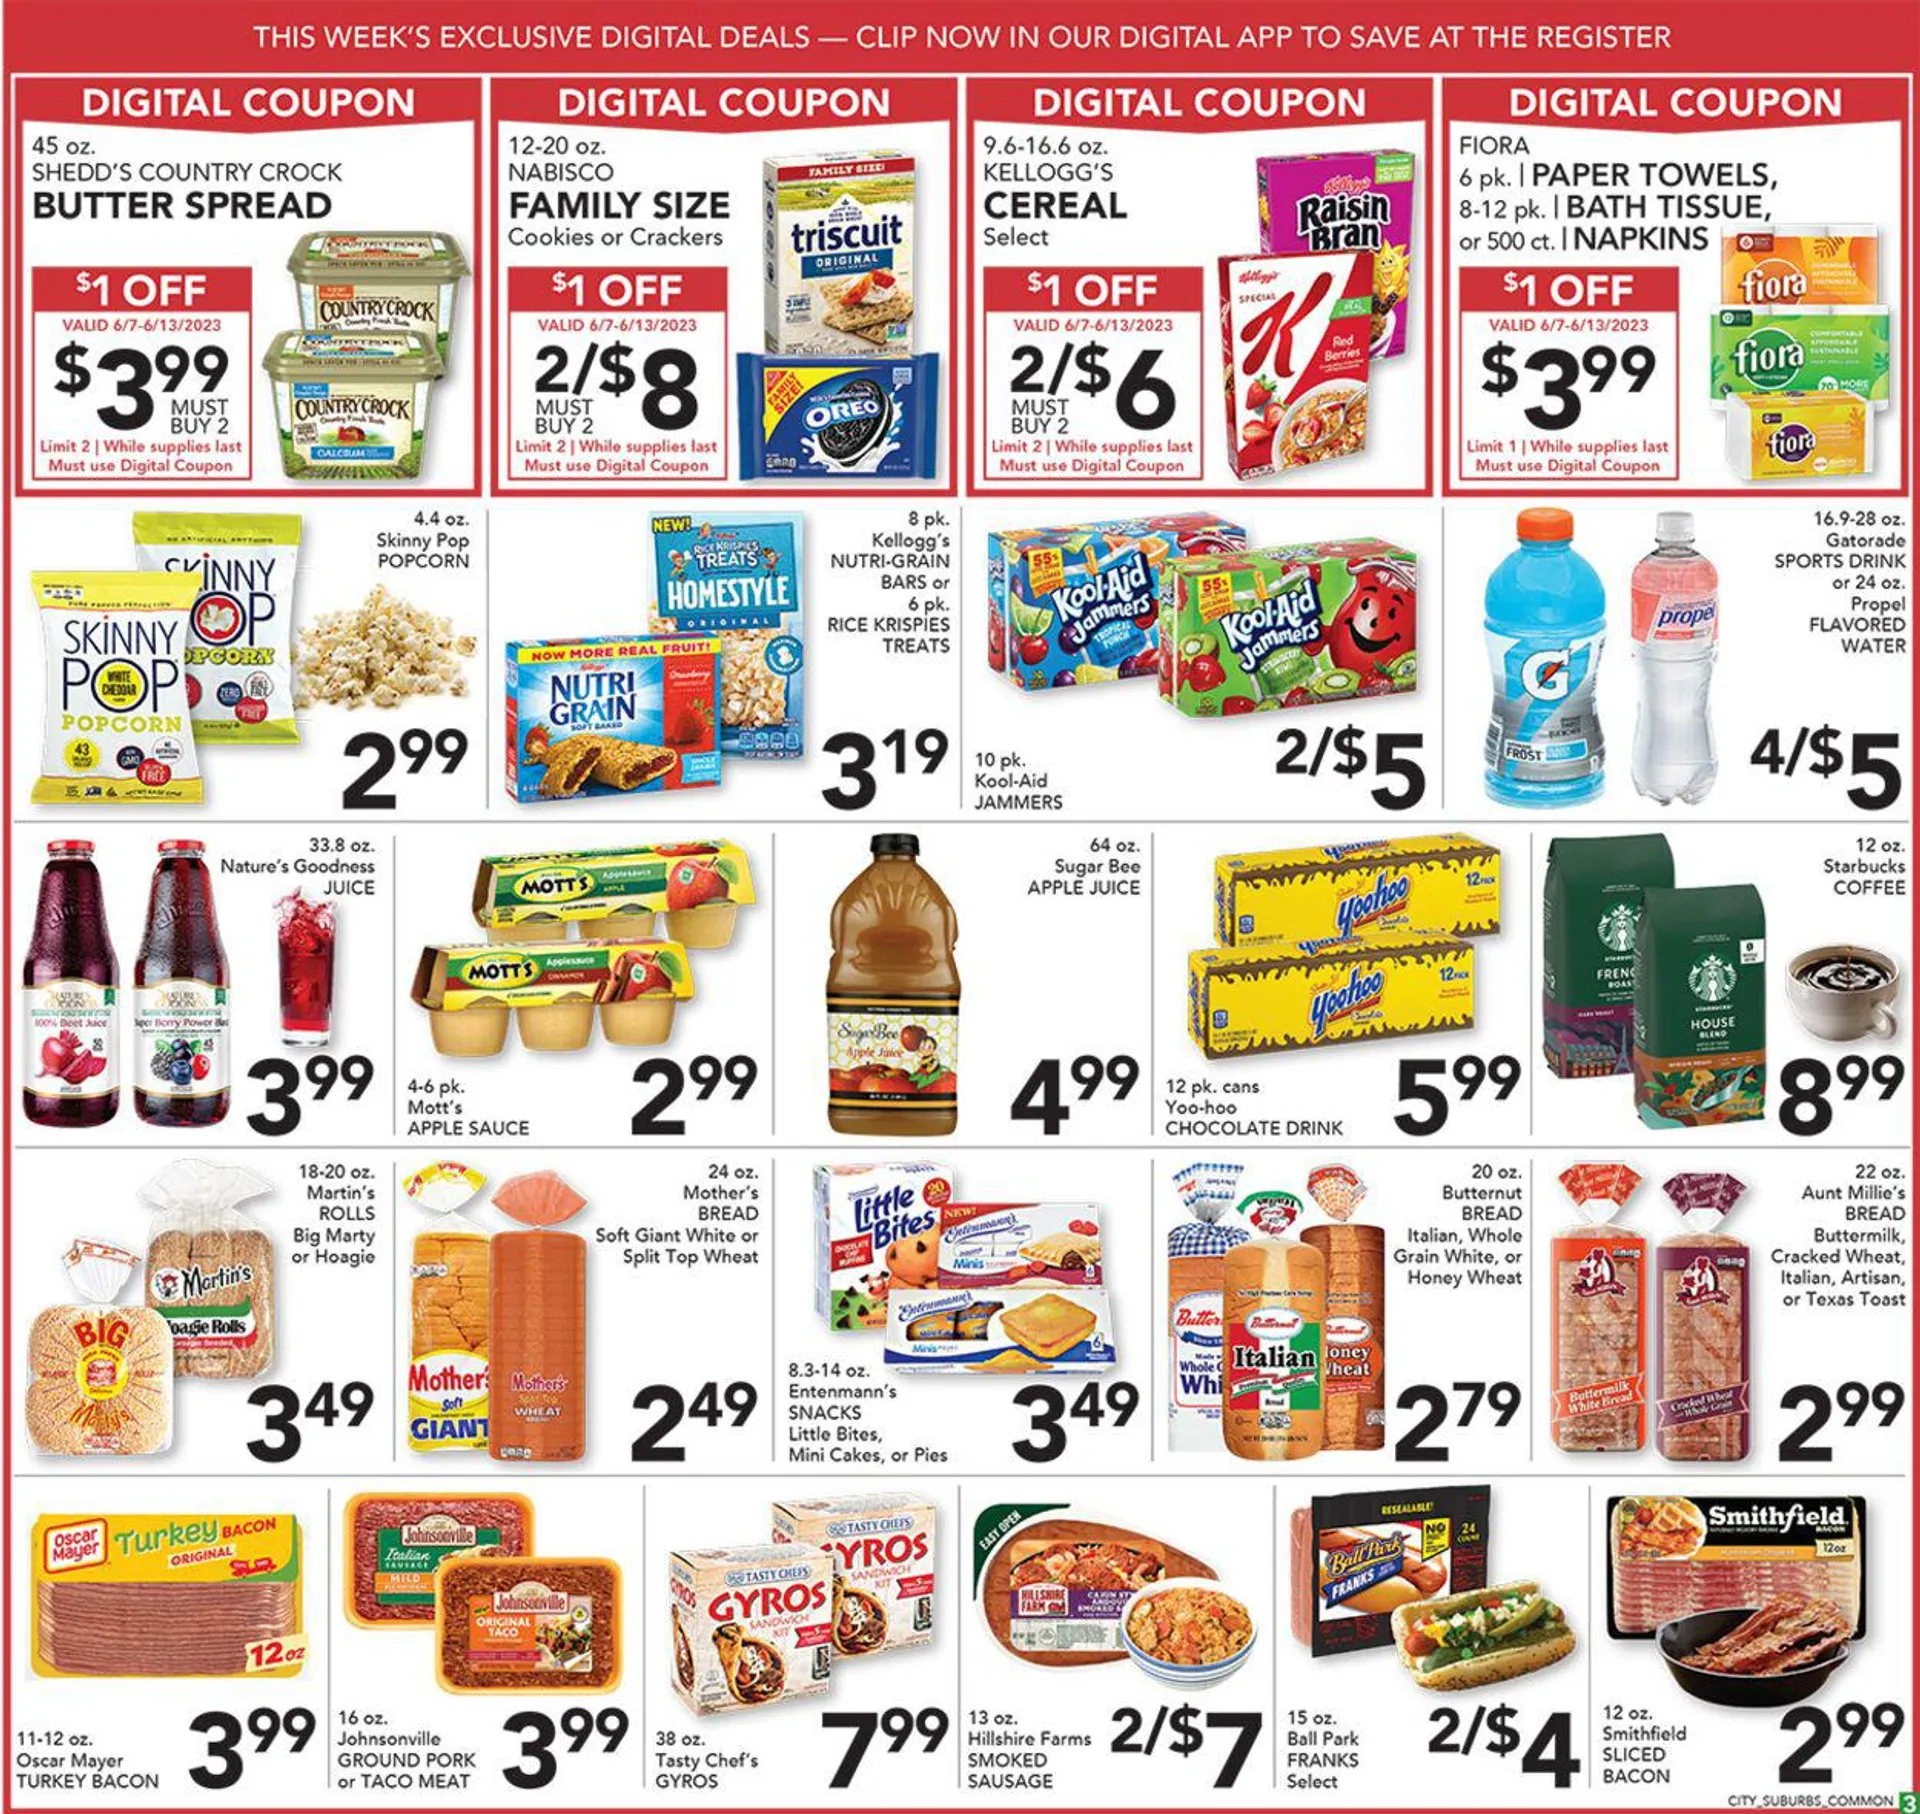 Petes Fresh Market Current weekly ad - 3